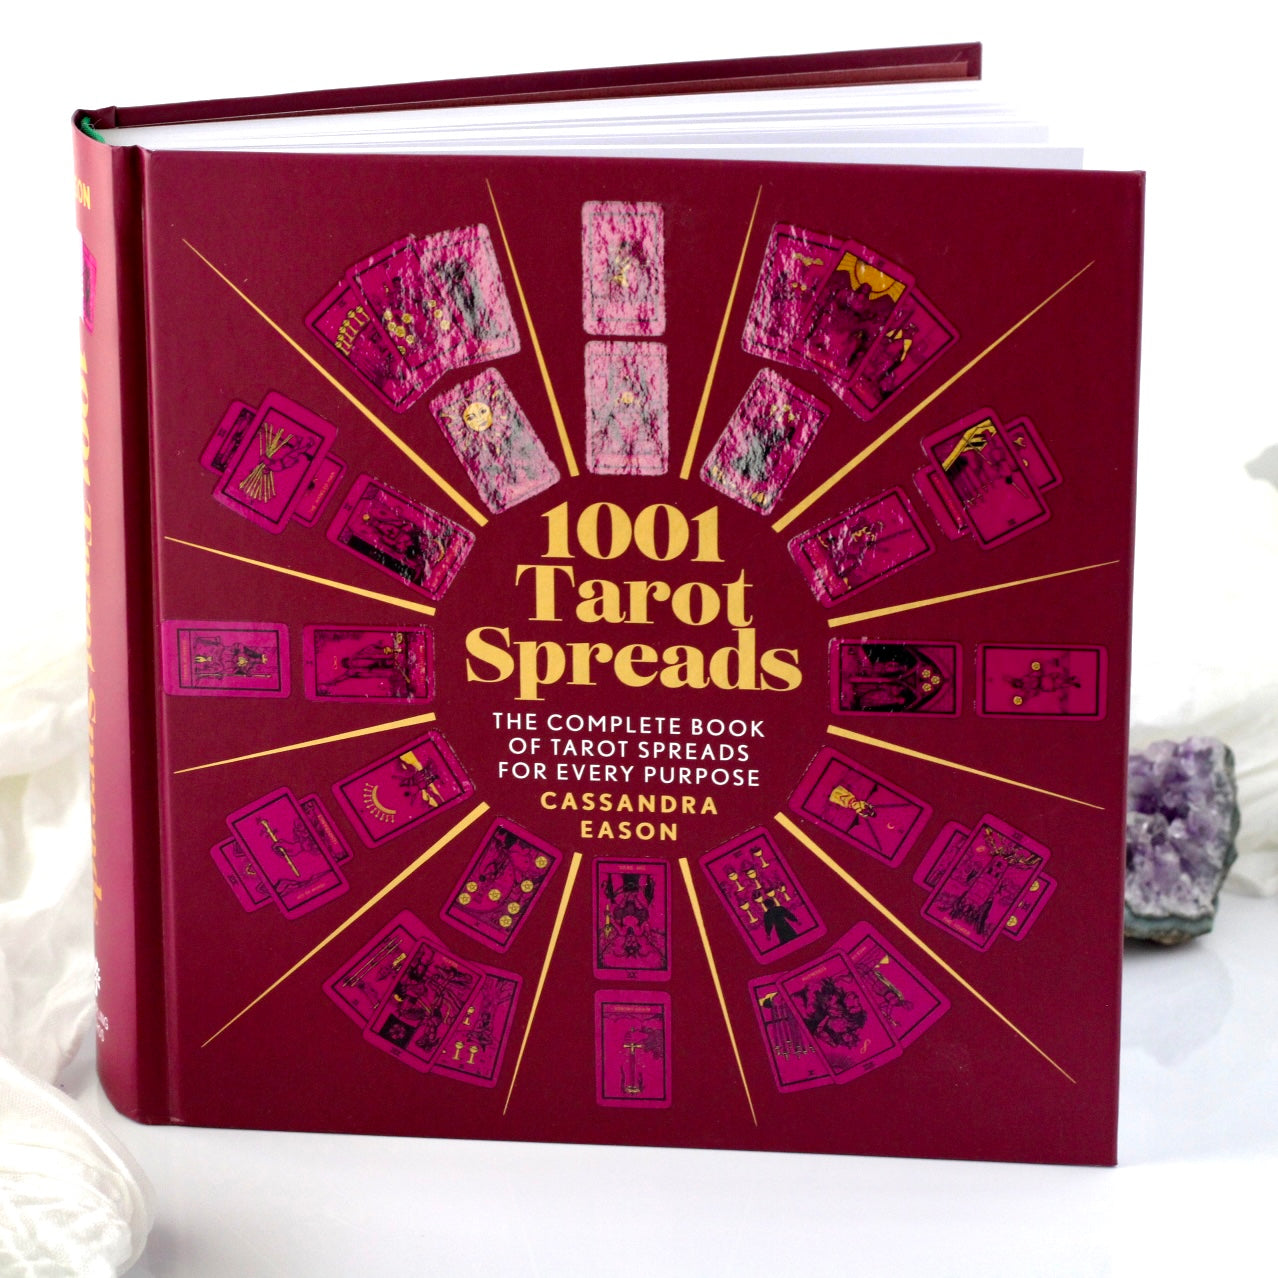 1001 Tarot Spreads: The Complete Book of Tarot Spreads For Every Purpose By Cassandra Eason